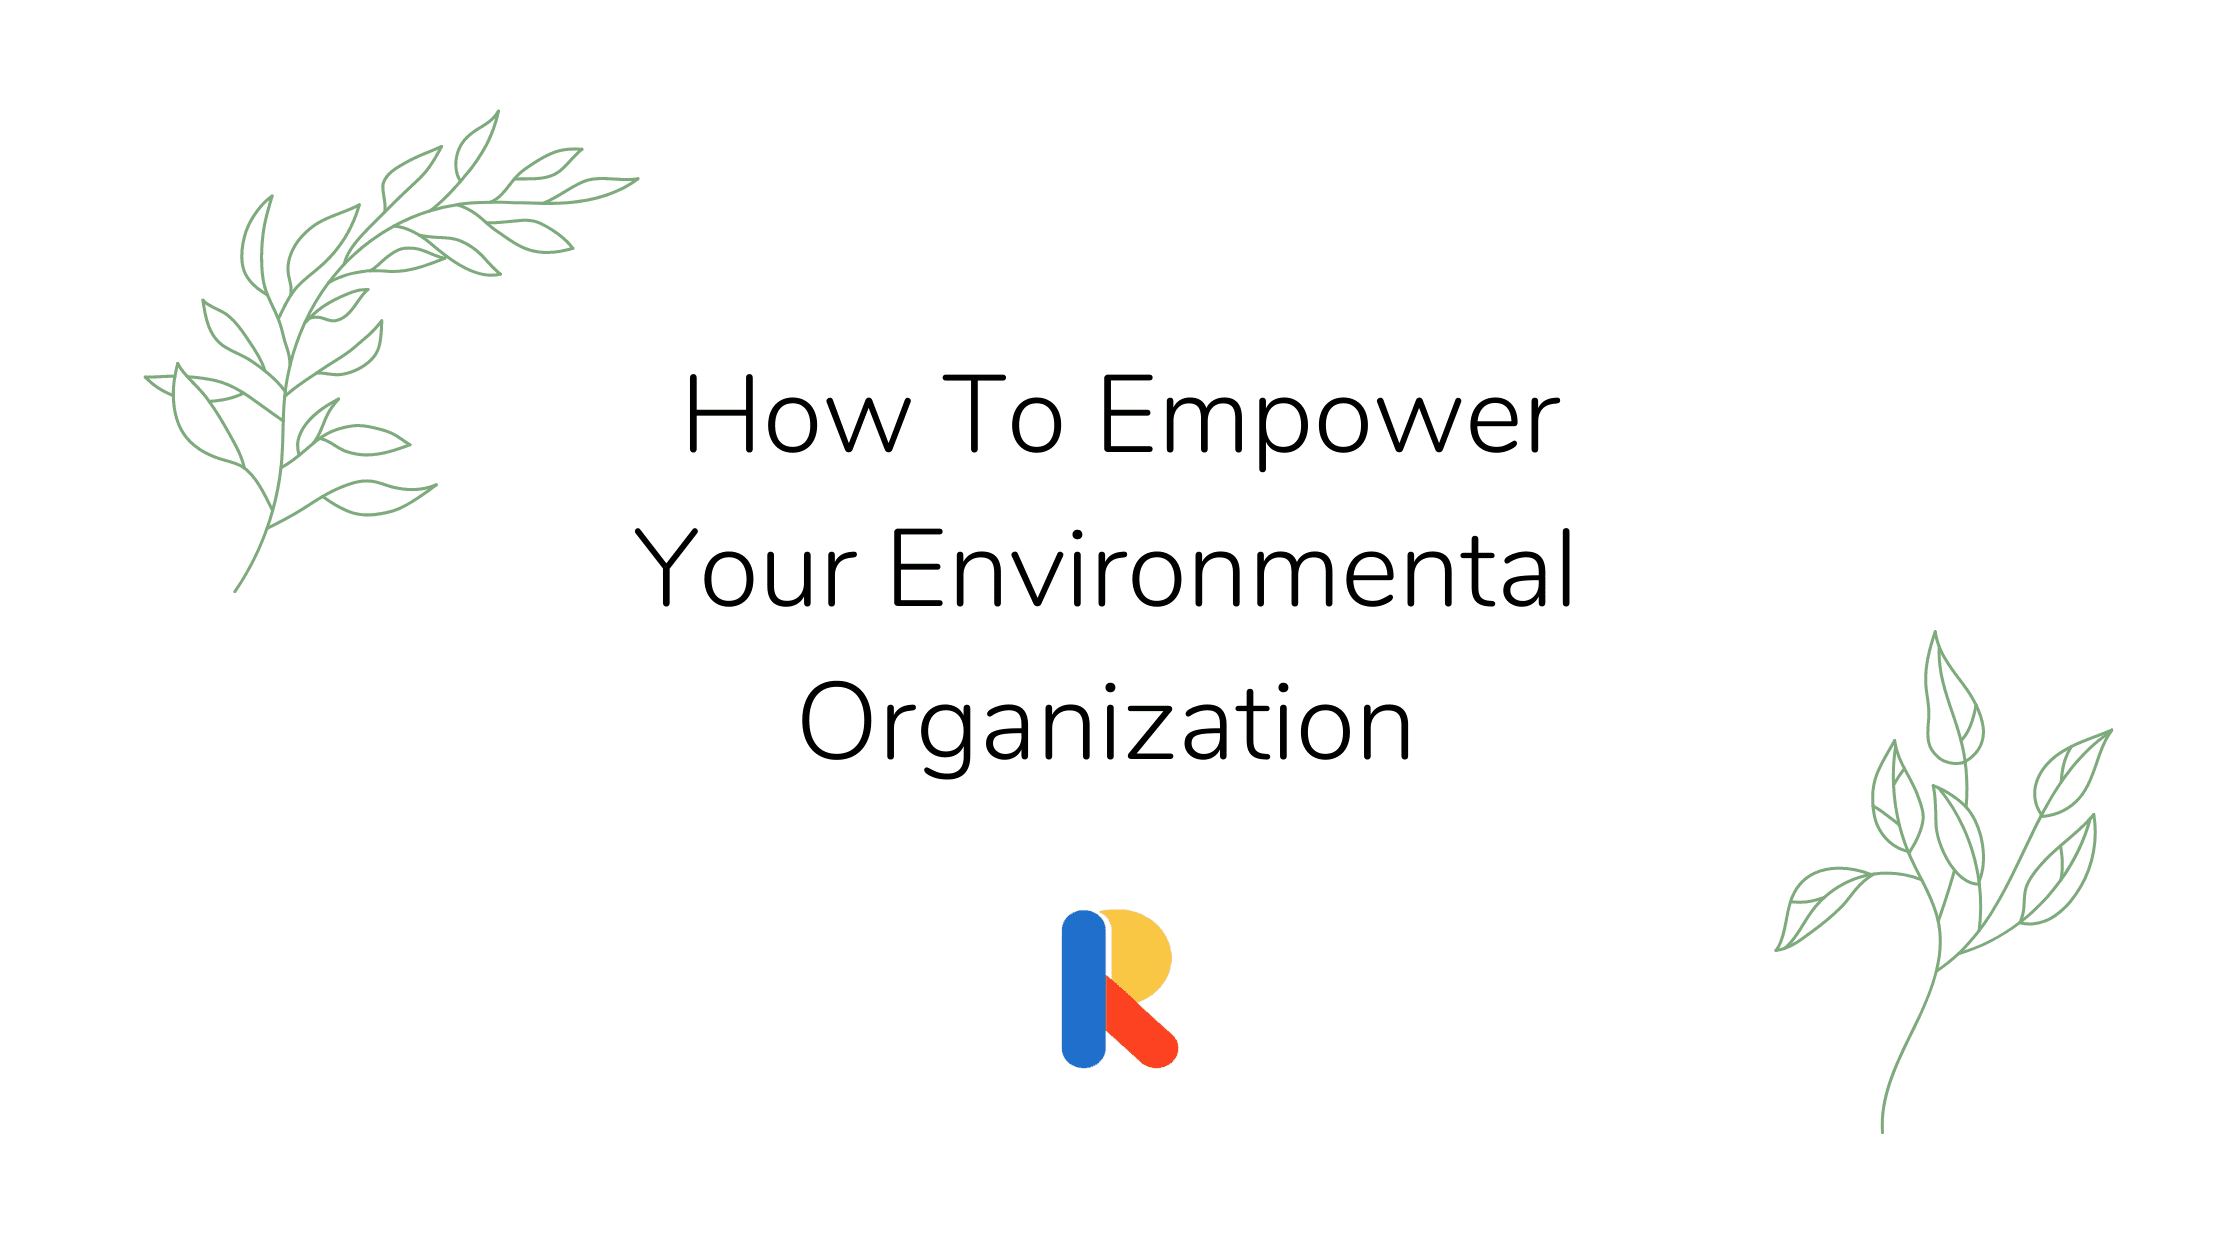 How to Empower Your Environmental Organization